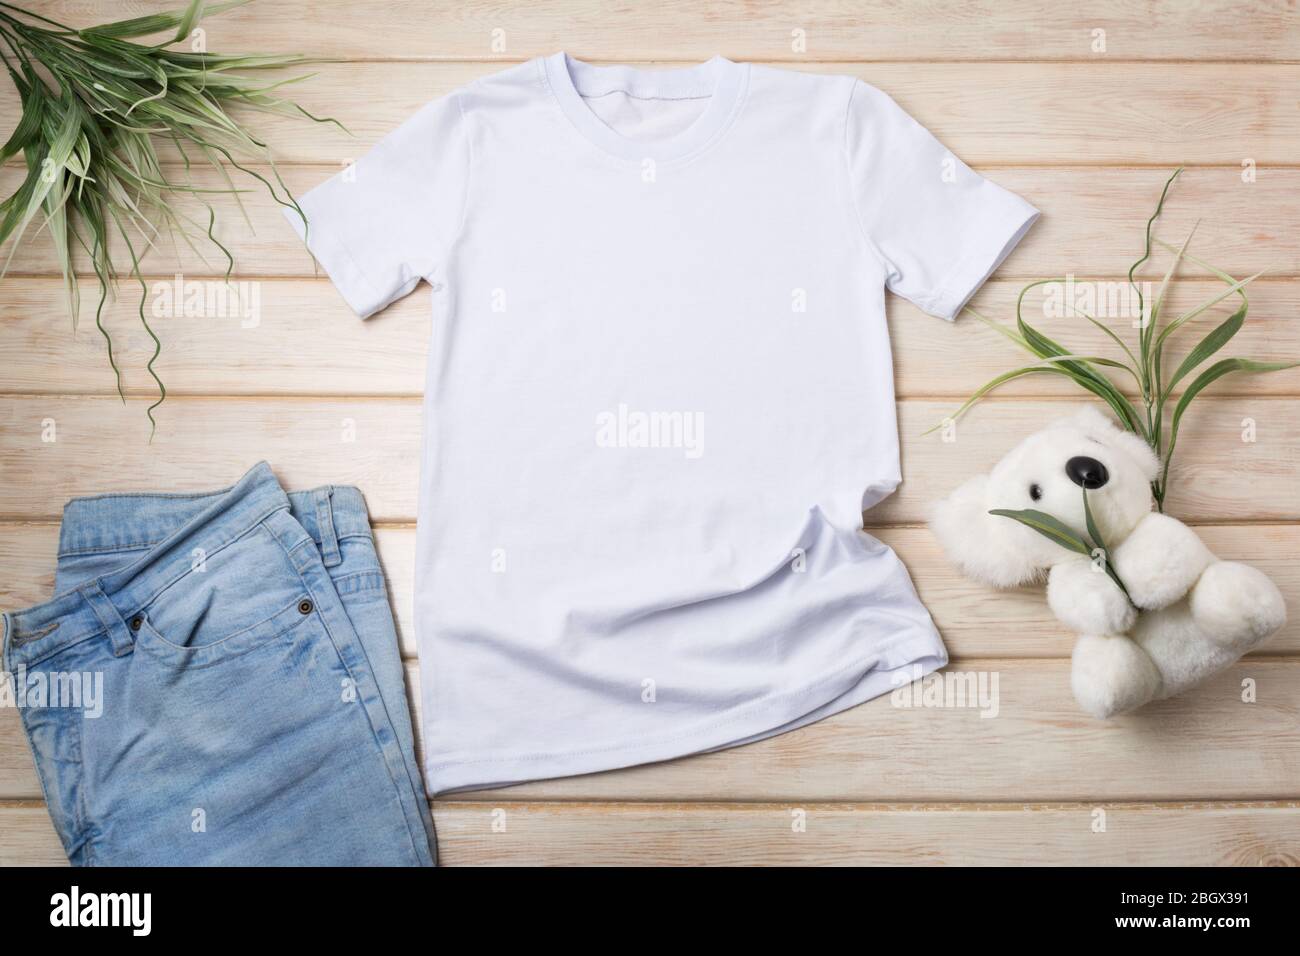 Download White Kids Cotton T Shirt Mockup With Koala Bear Soft Toy And Blue Jeans Design T Shirt Template Tee Print Presentation Mock Up Stock Photo Alamy